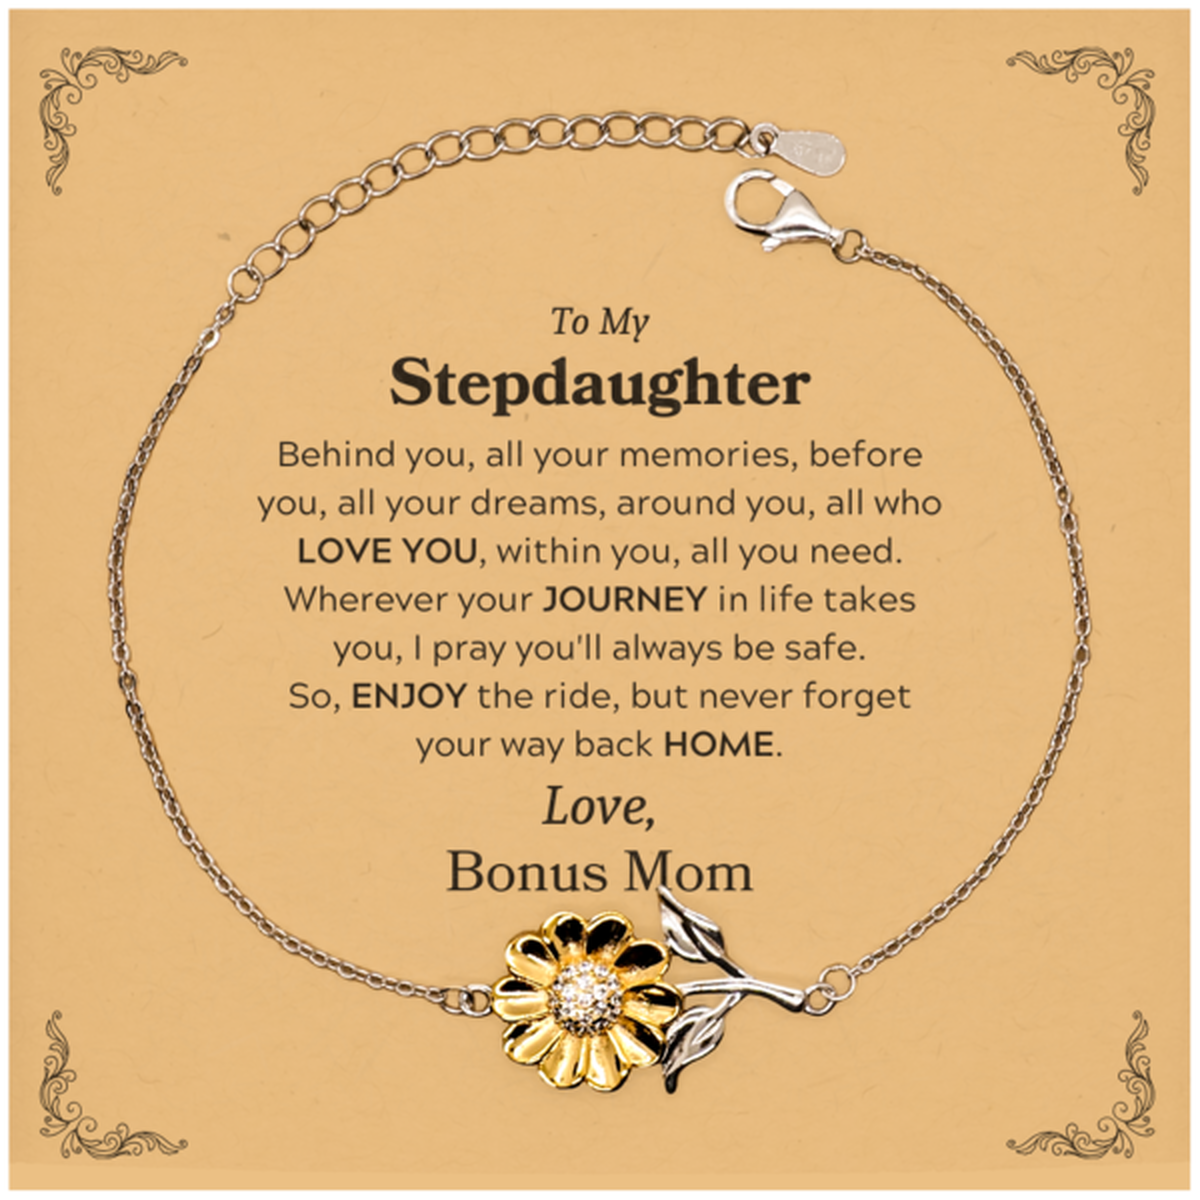 To My Stepdaughter Graduation Gifts from Bonus Mom, Stepdaughter Sunflower Bracelet Christmas Birthday Gifts for Stepdaughter Behind you, all your memories, before you, all your dreams. Love, Bonus Mom